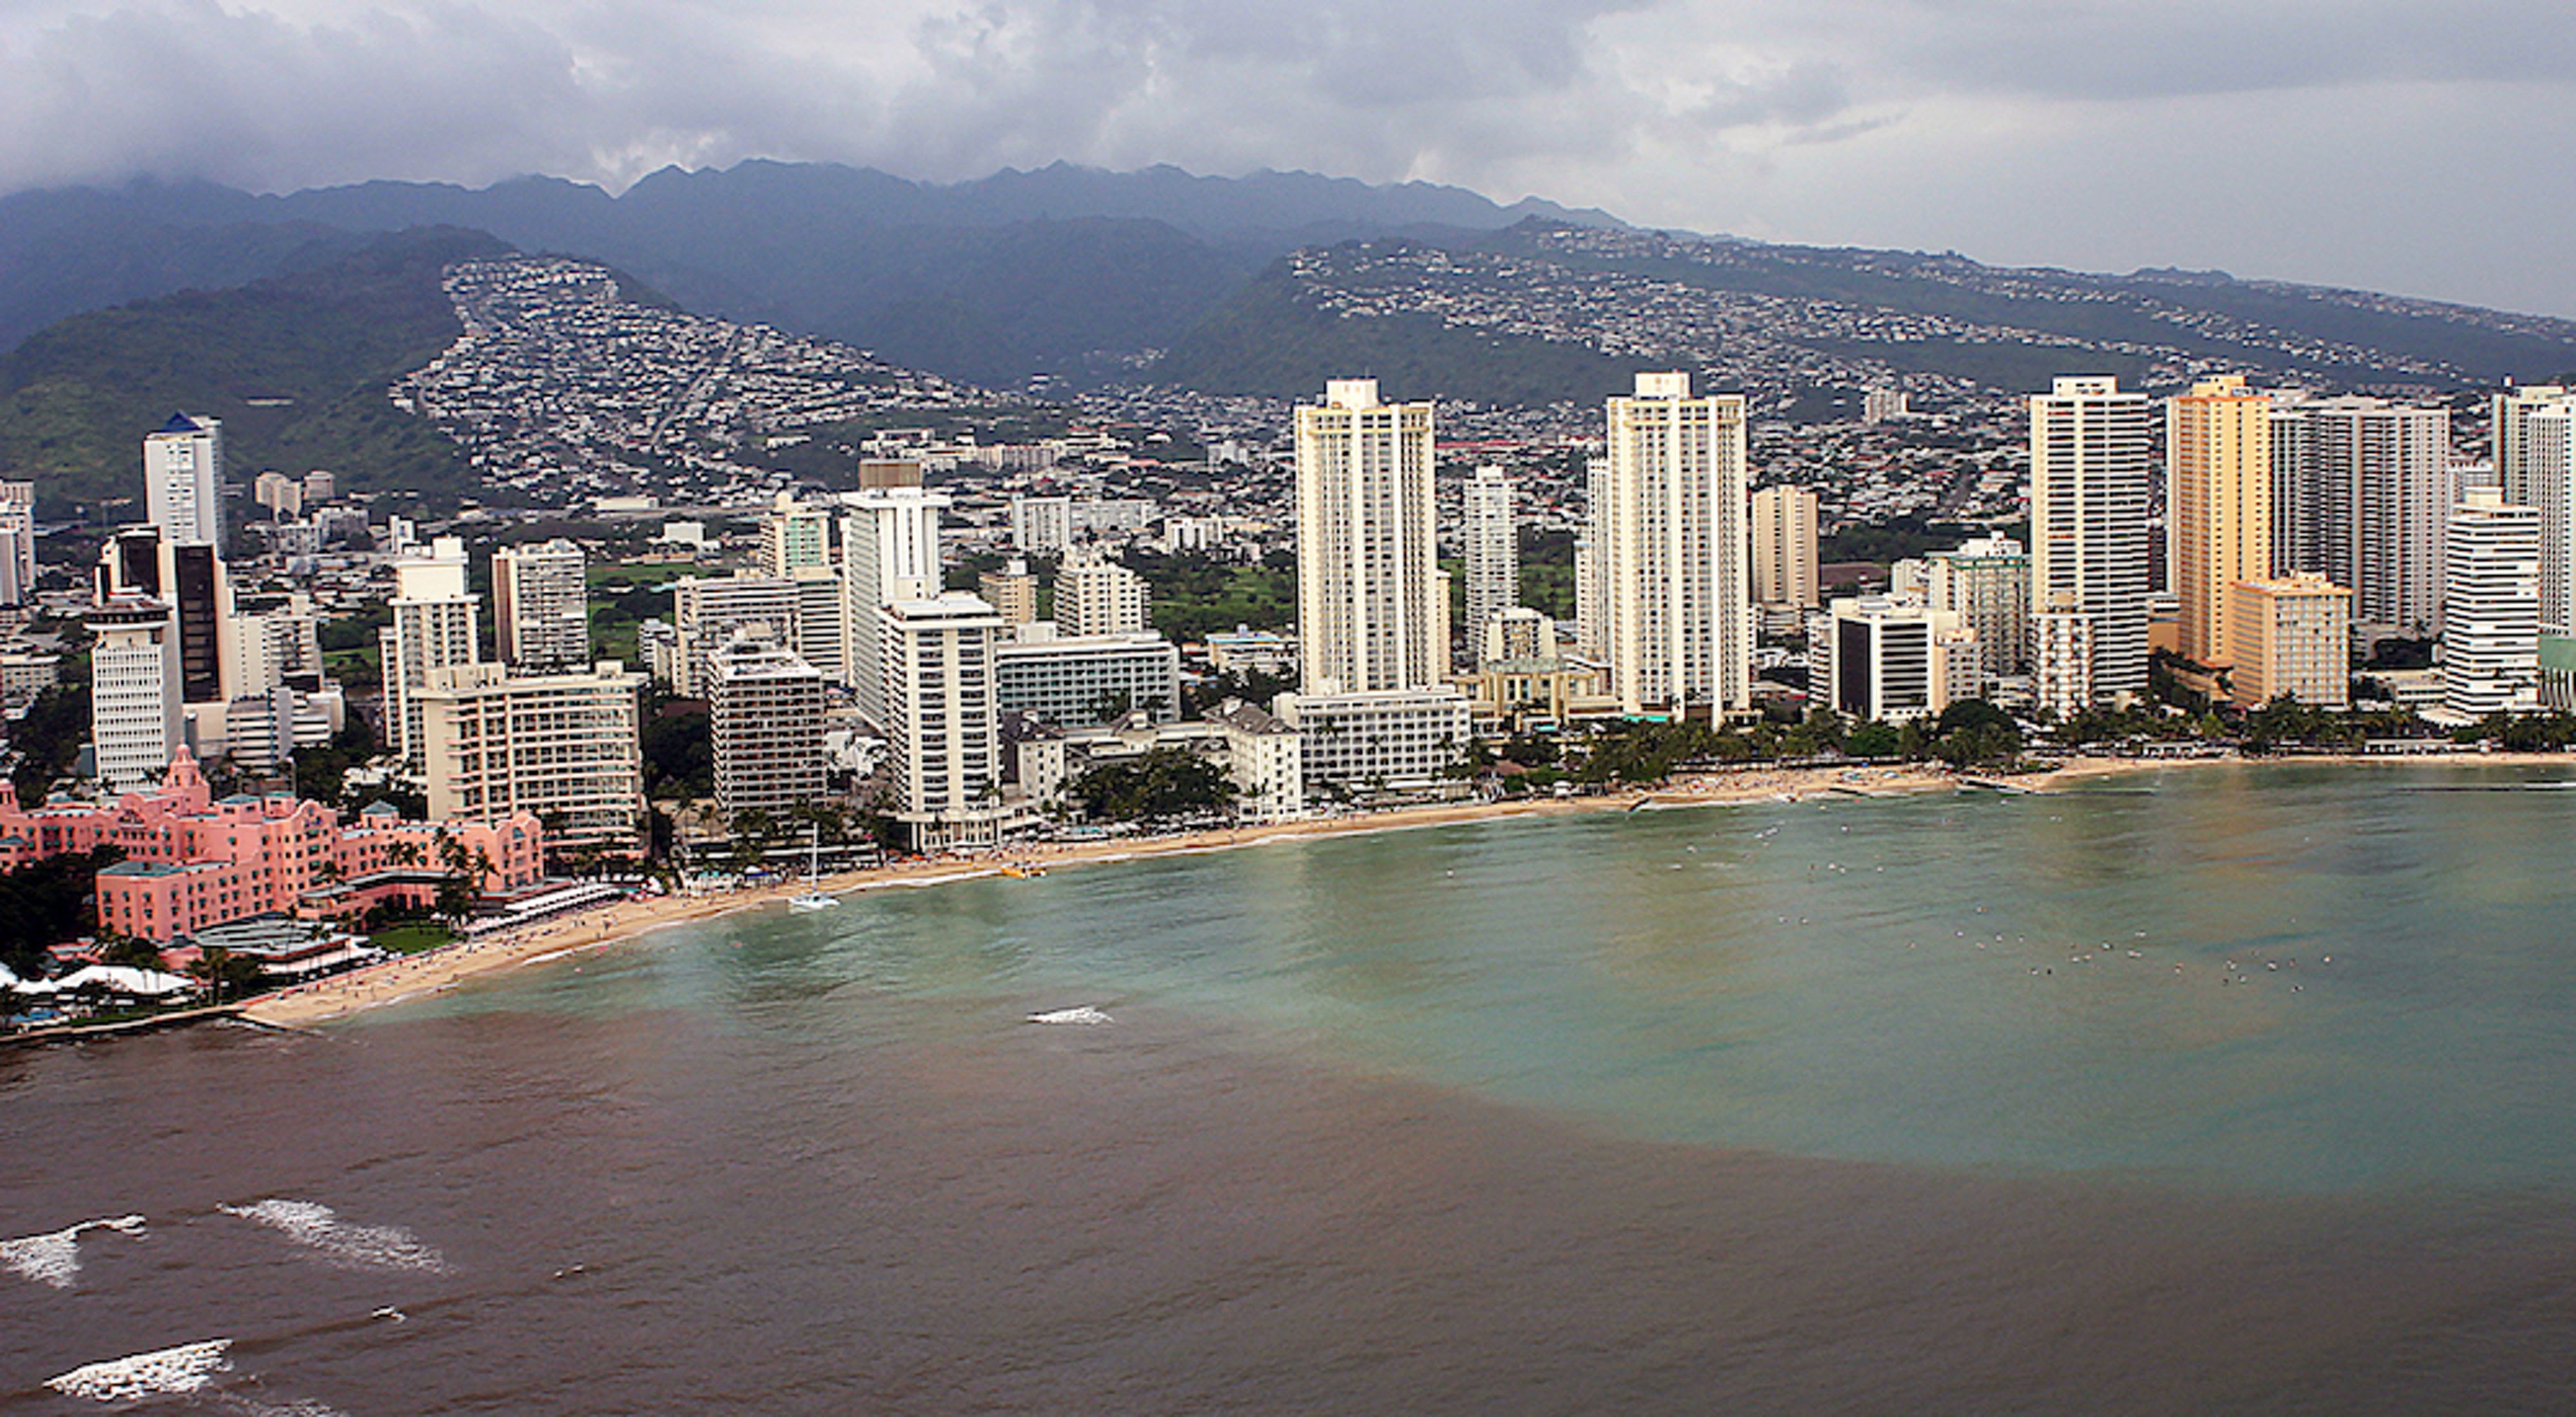 Cityscape along Waikiki beach with polluted water in the foreground